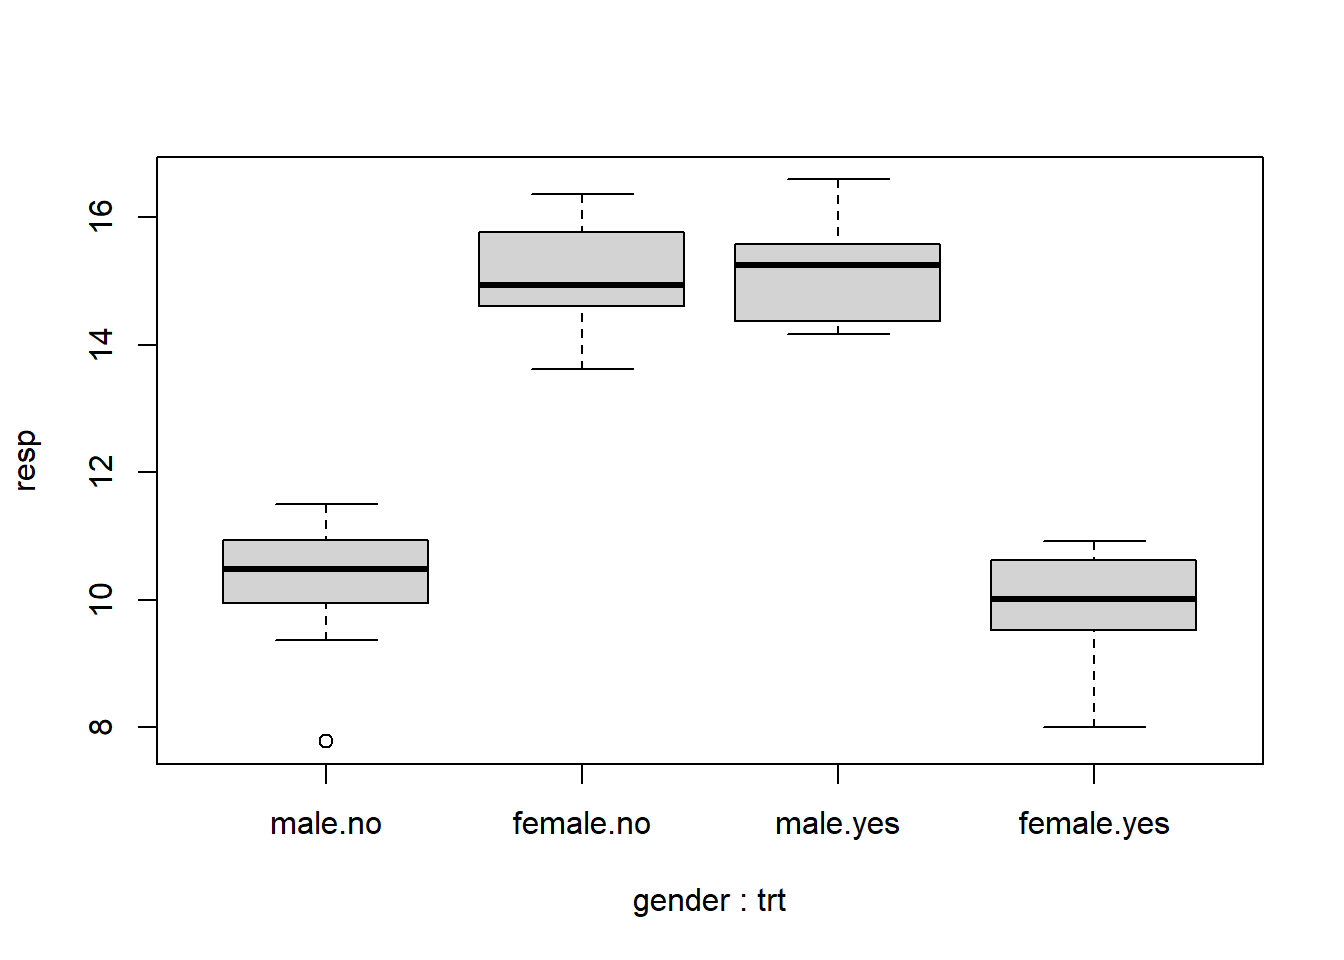 Boxplot of response grouped by gender and treat interaction